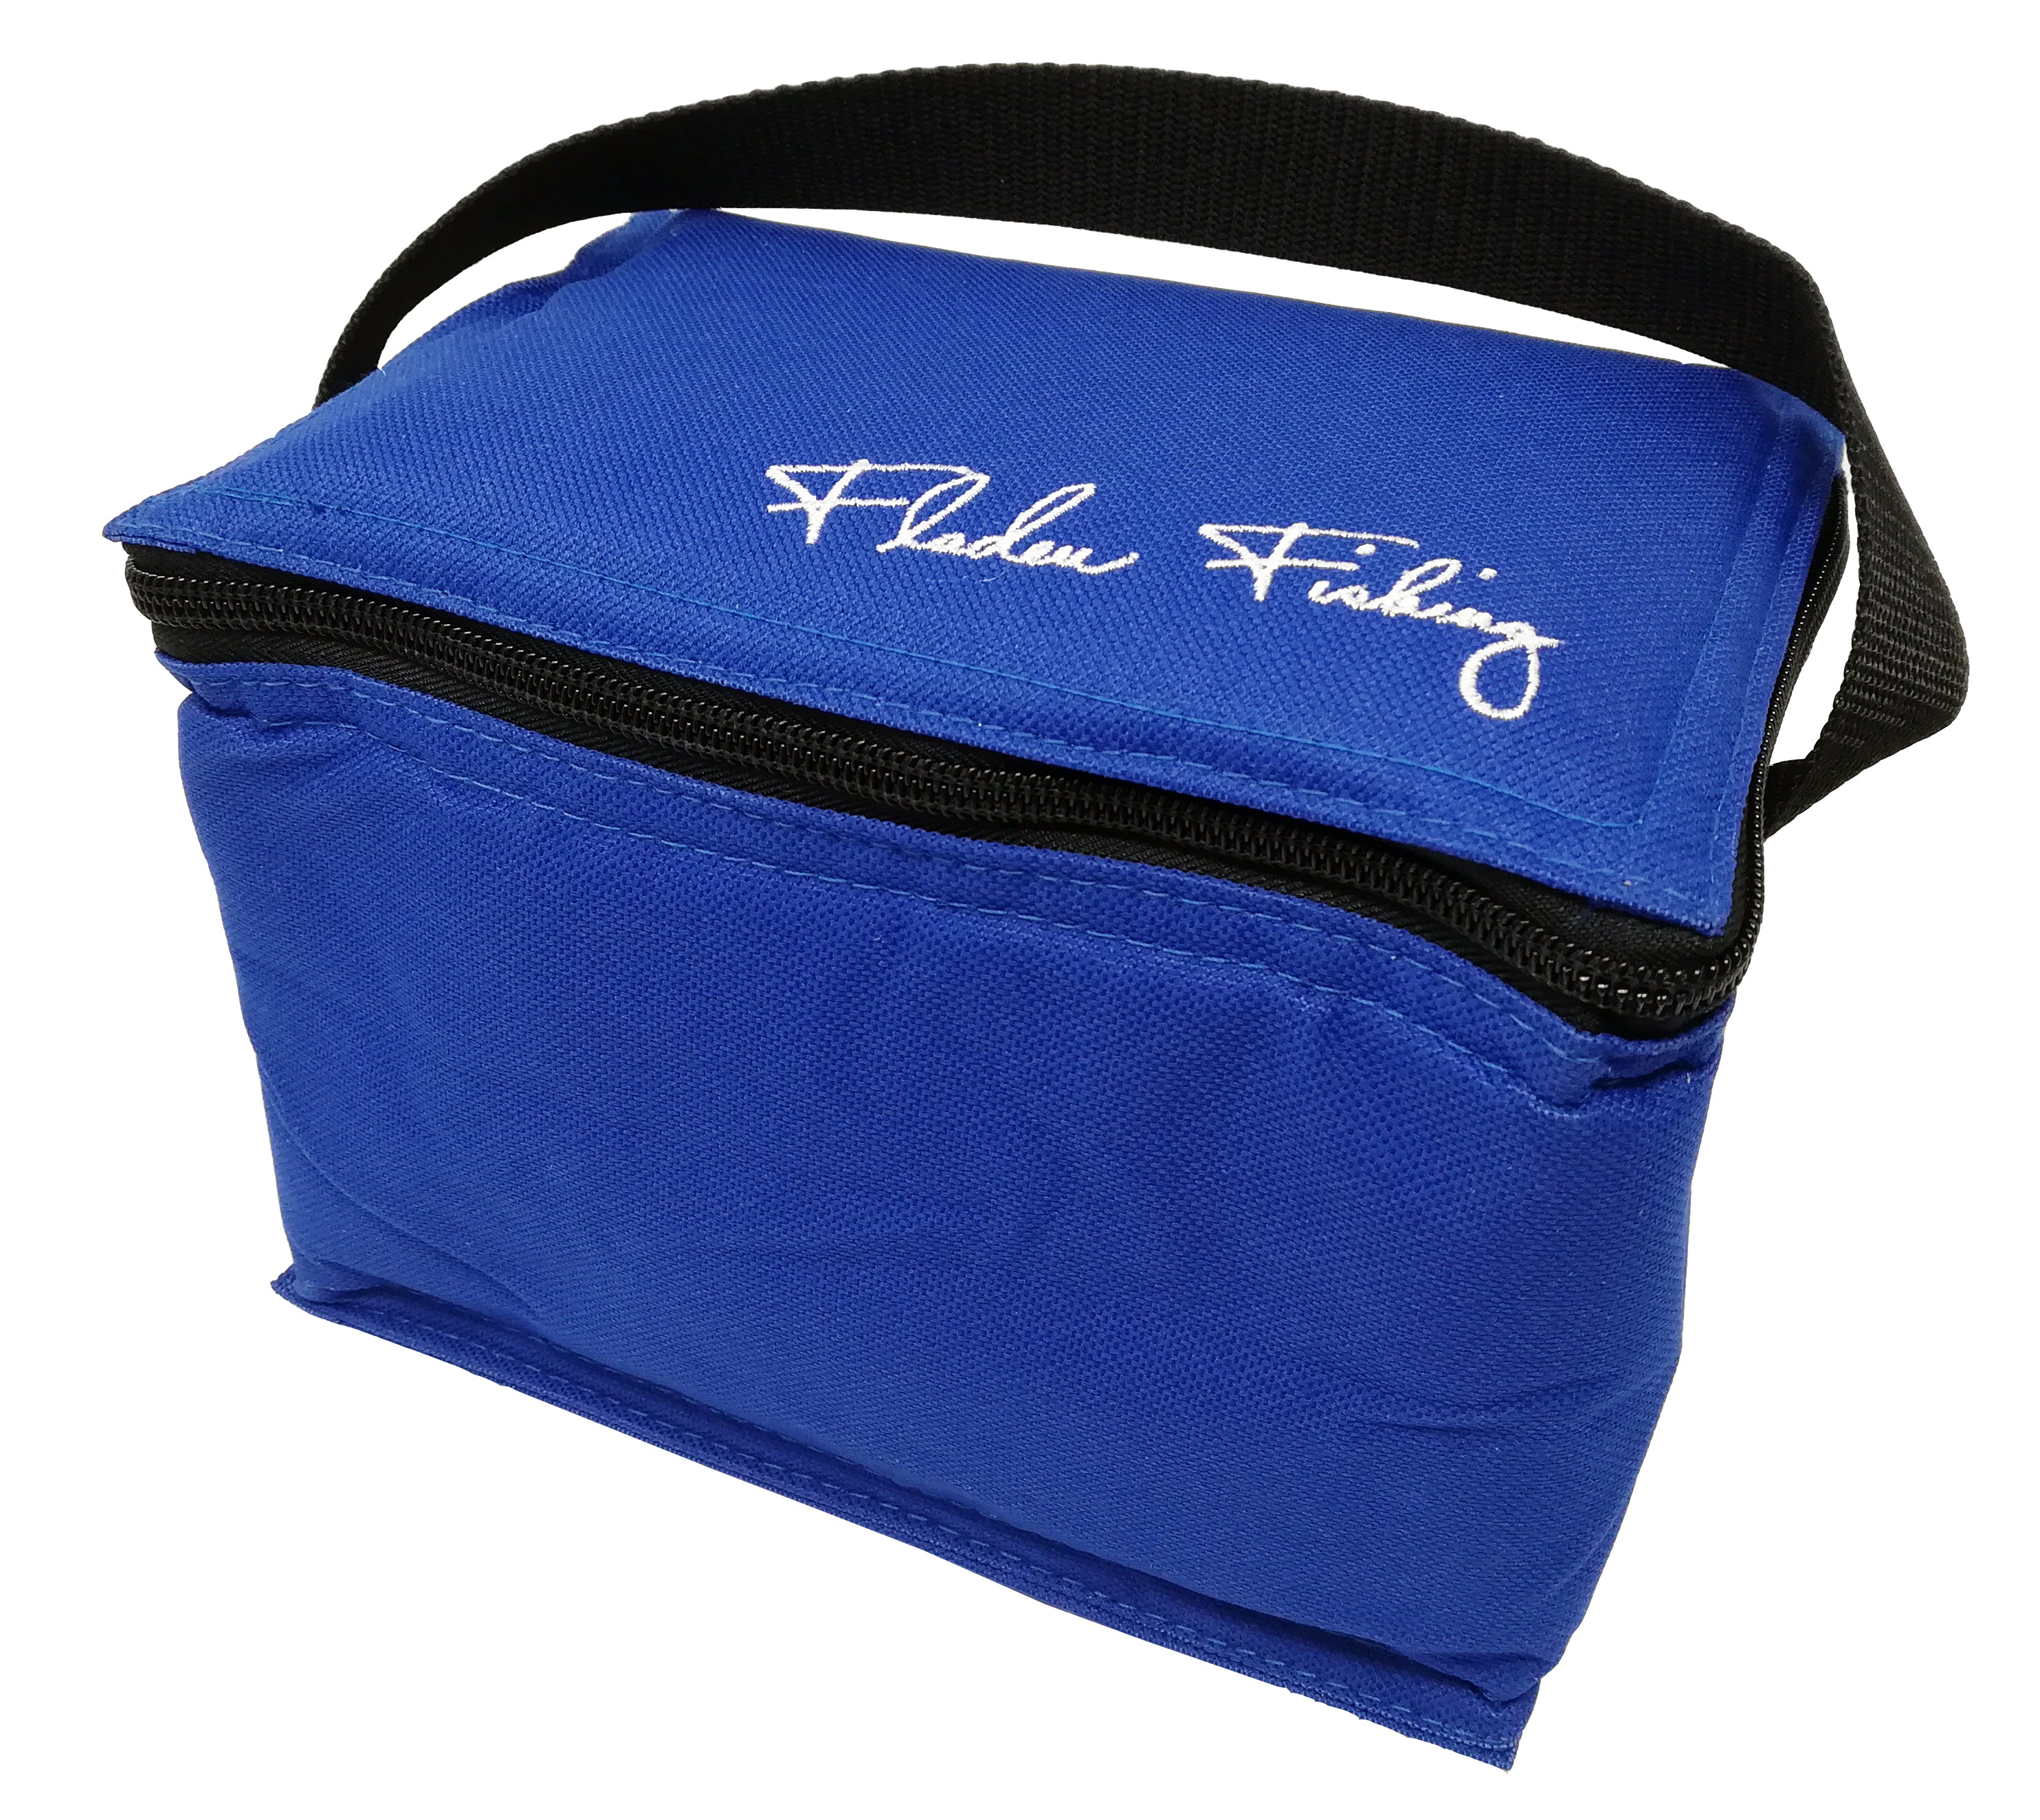 Fladen Fishing 3L Small Cool Bag - Ideal For Fishing Bait Food and Dri